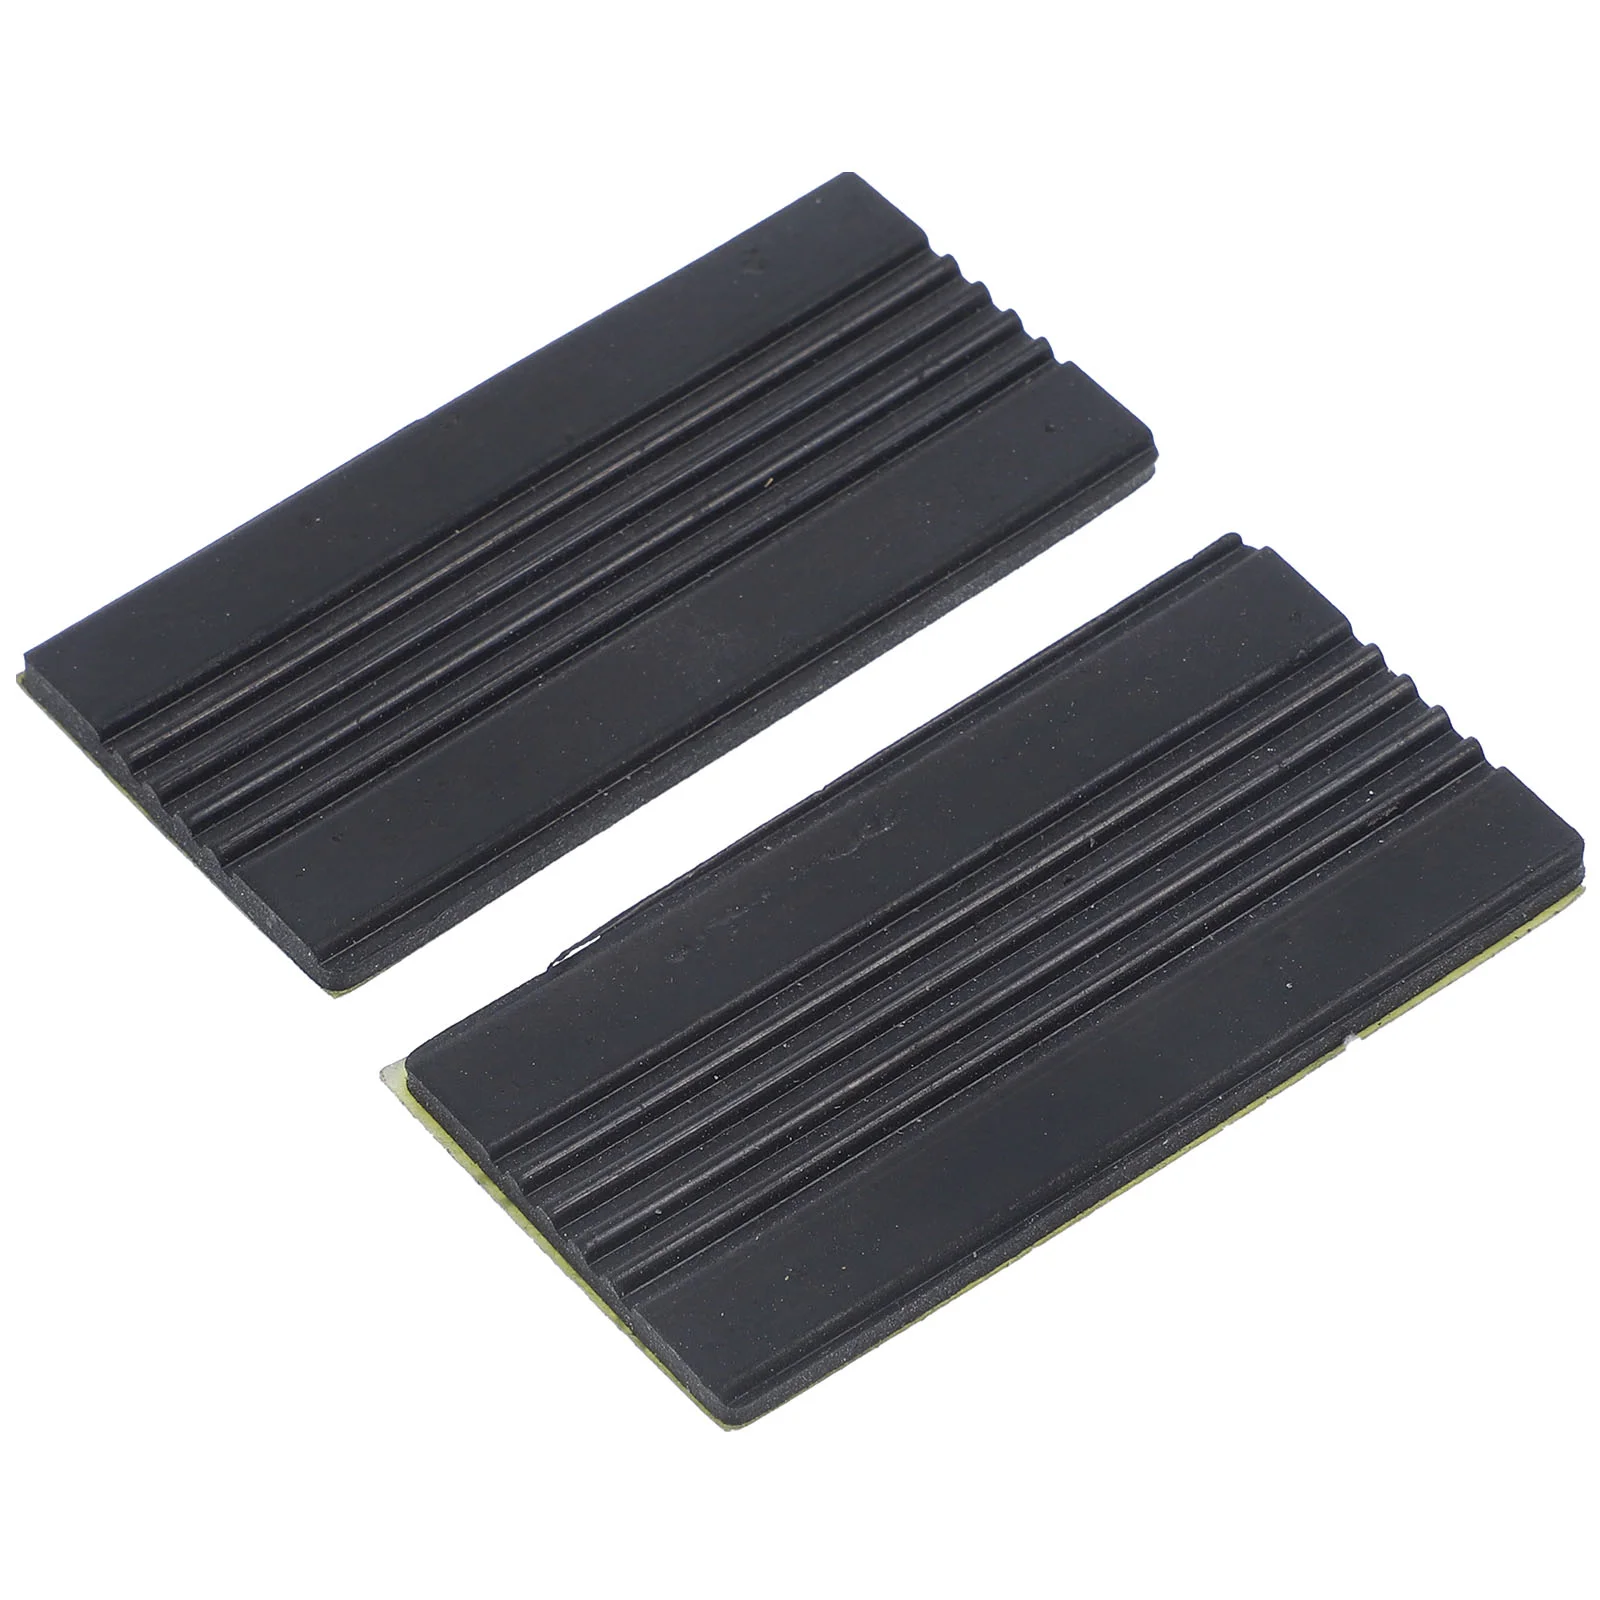 

Bass Drum Non-slip Rubber Pad Supports Foot Pads Pedal Guards Percussion Instrument Supplies Metal Brackets